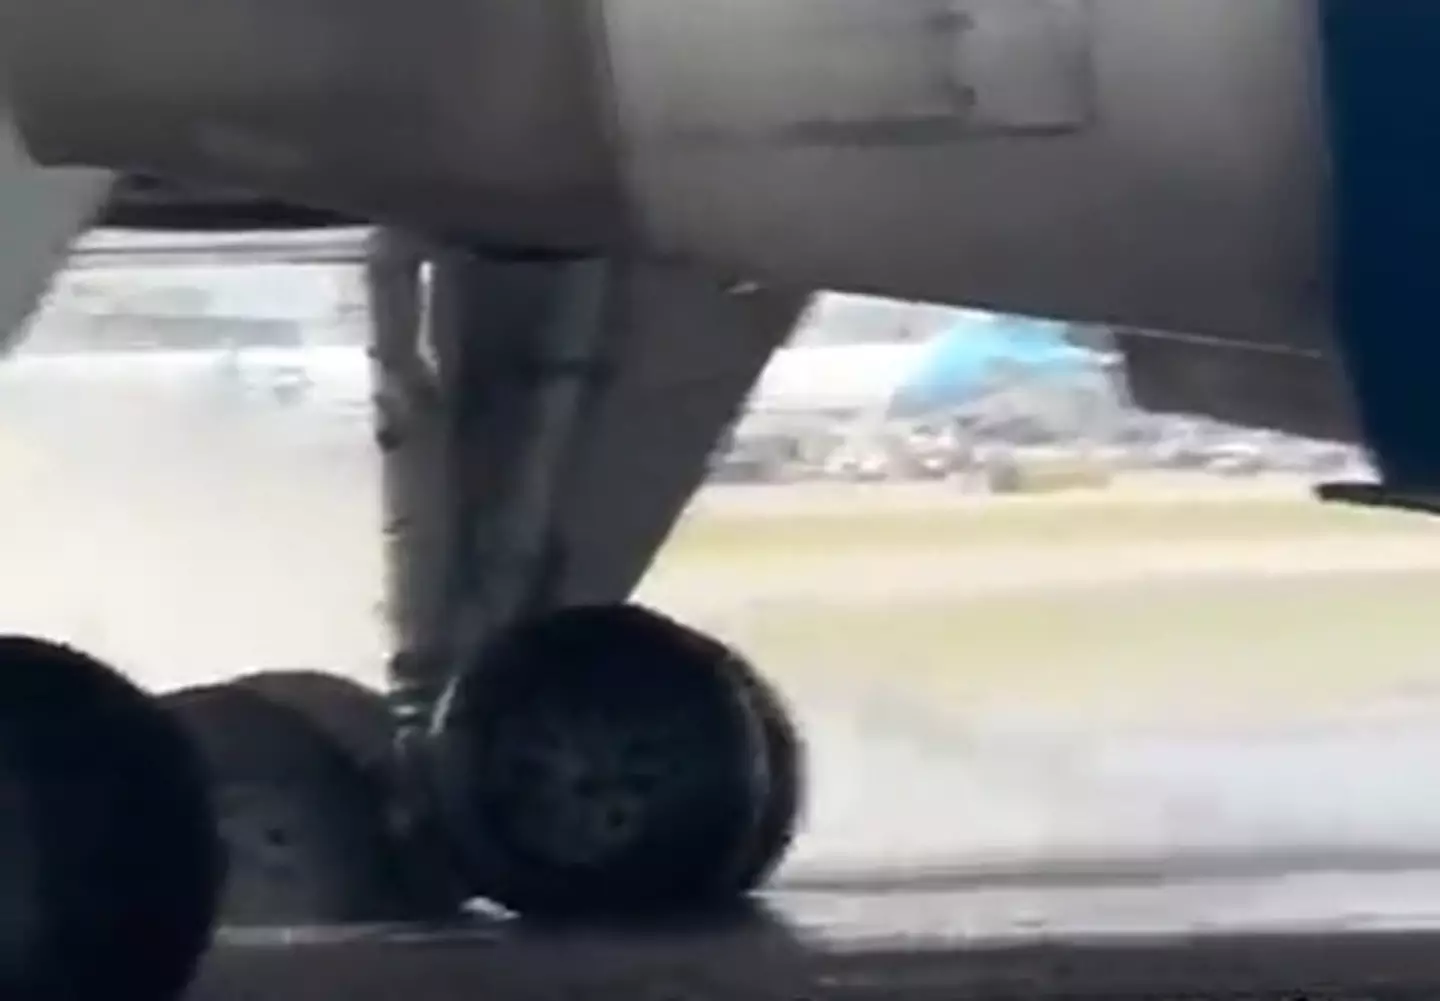 The airline explained that one of the plane's tires blew when it landed and some parts of the landing gear were hot, hence the evacuation.